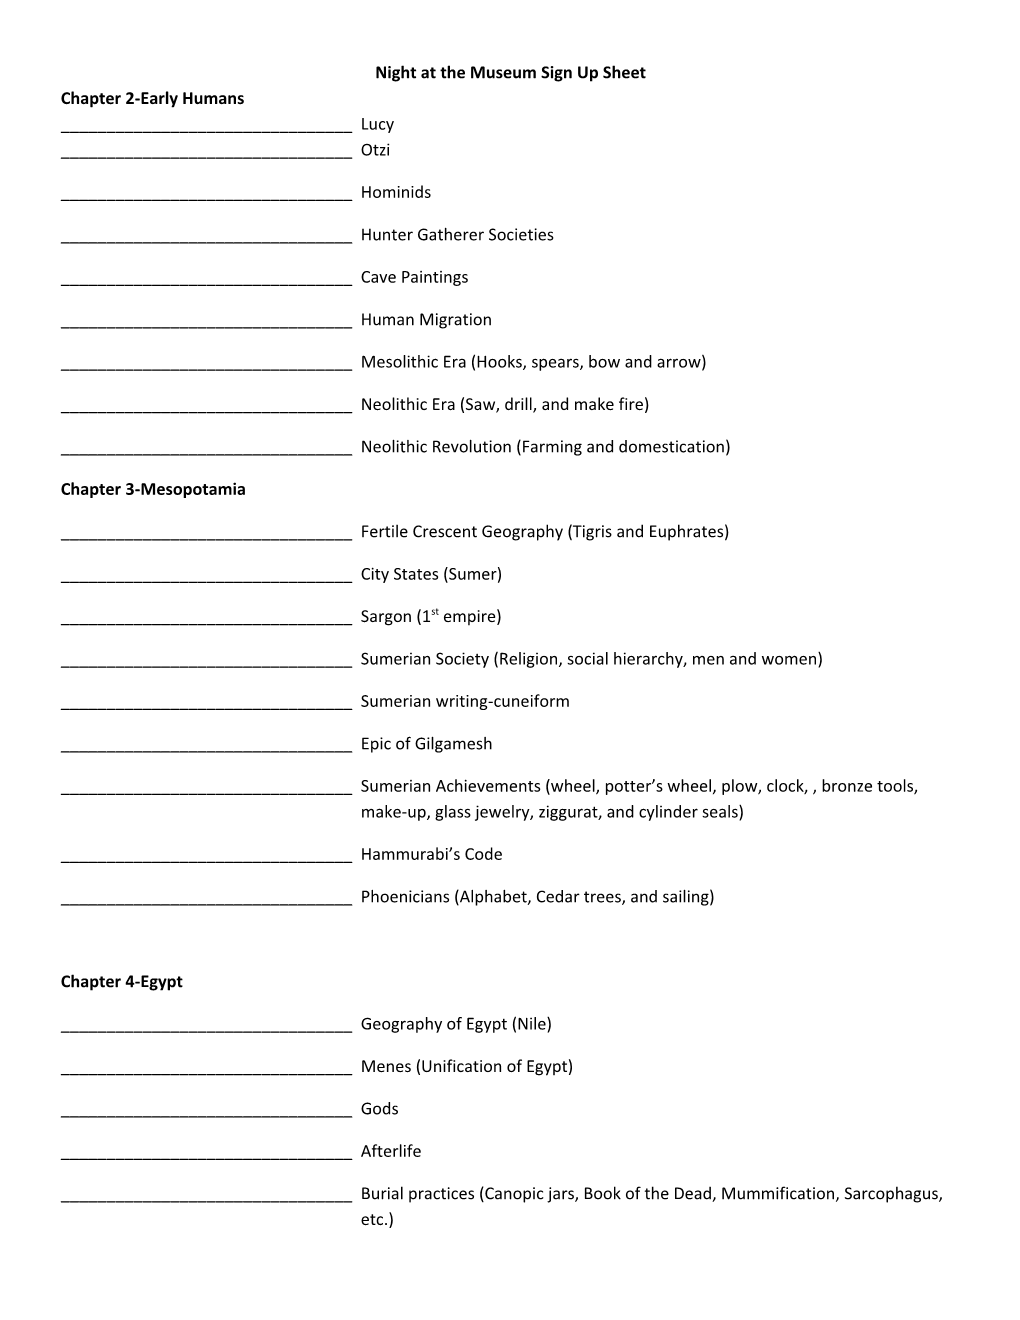 Night at the Museum Sign up Sheet